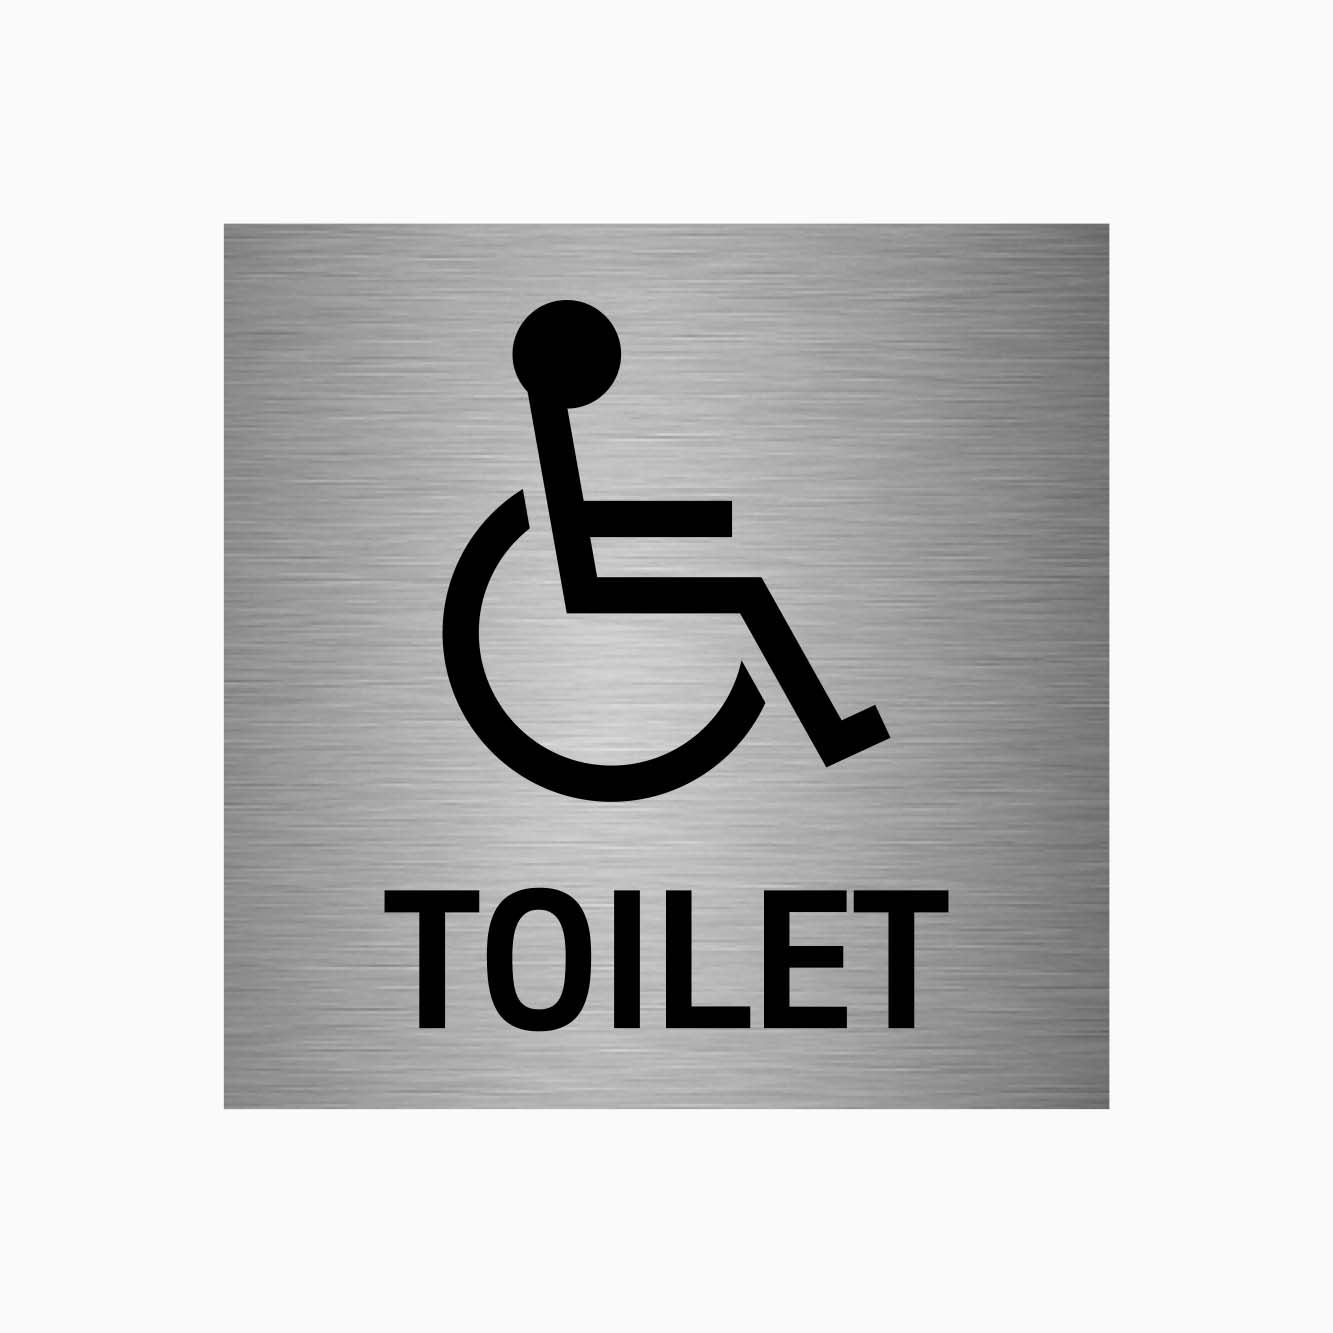 DISABLED TOILET SIGN - SILVER BACKGROUND